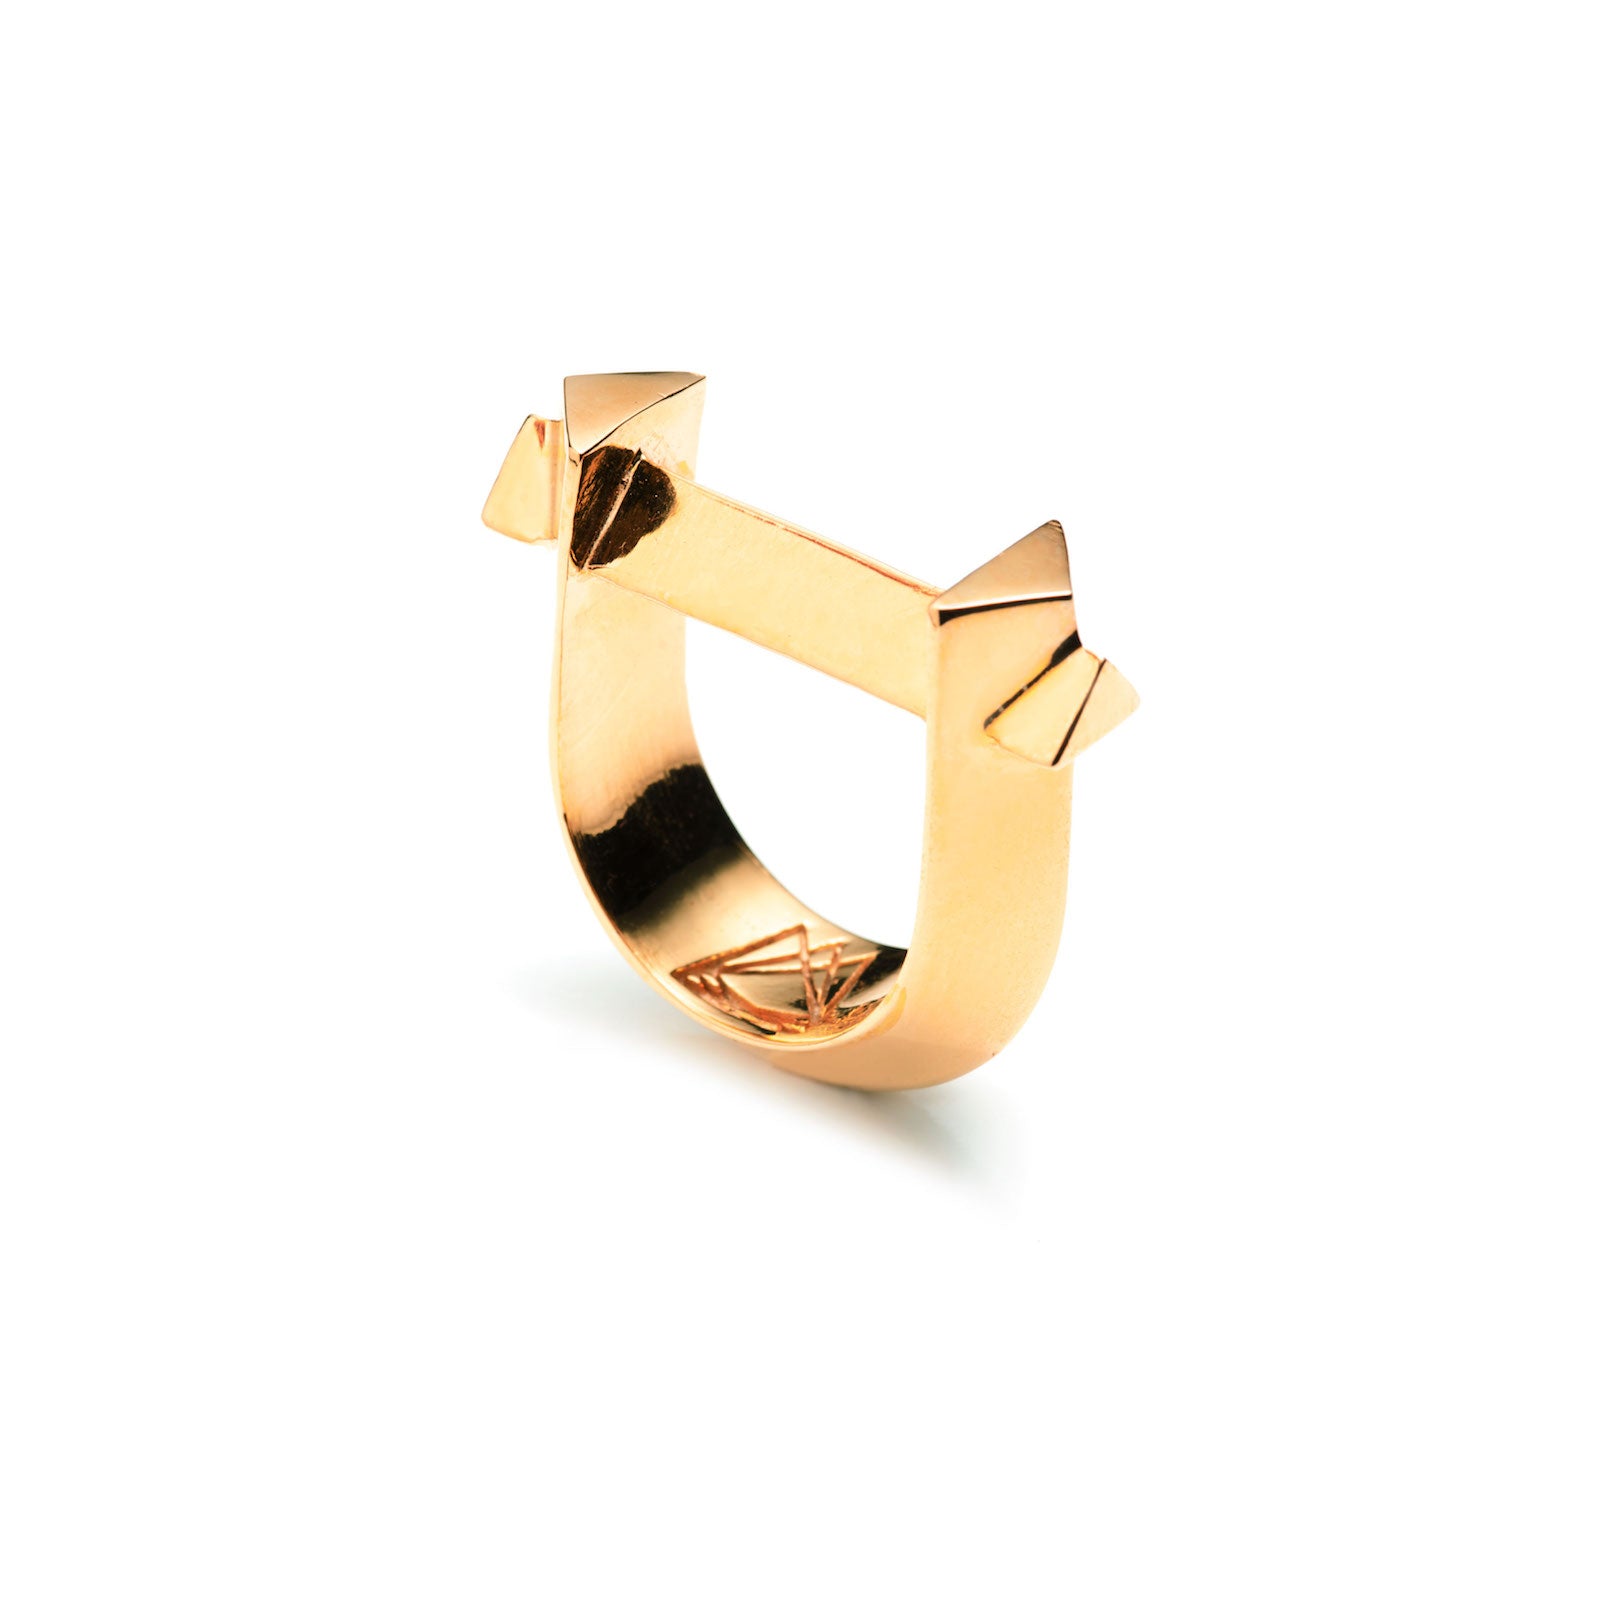 ARC RING - 18K GOLD PLATED BRASS